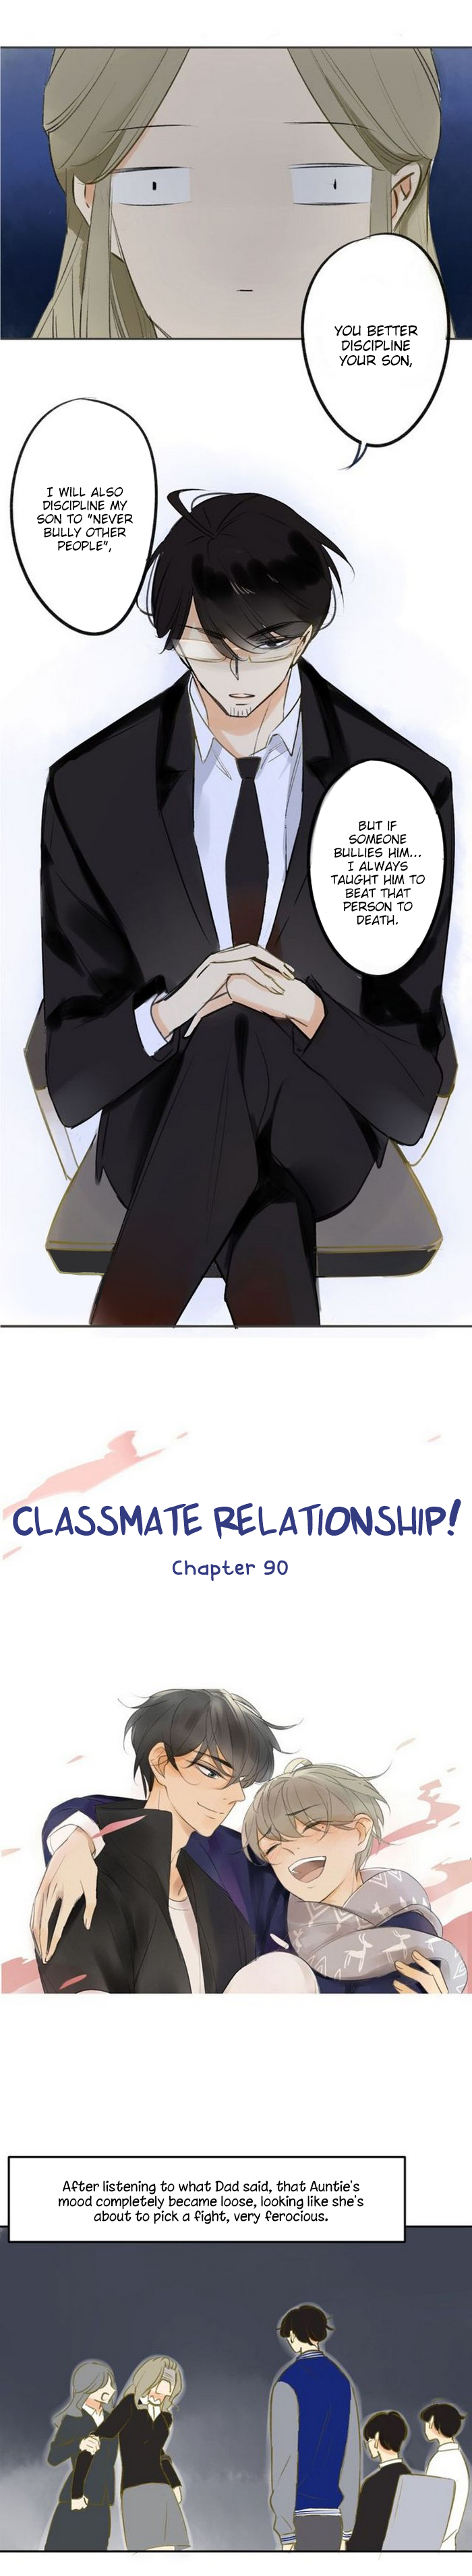 Classmate Relationship? - Page 2